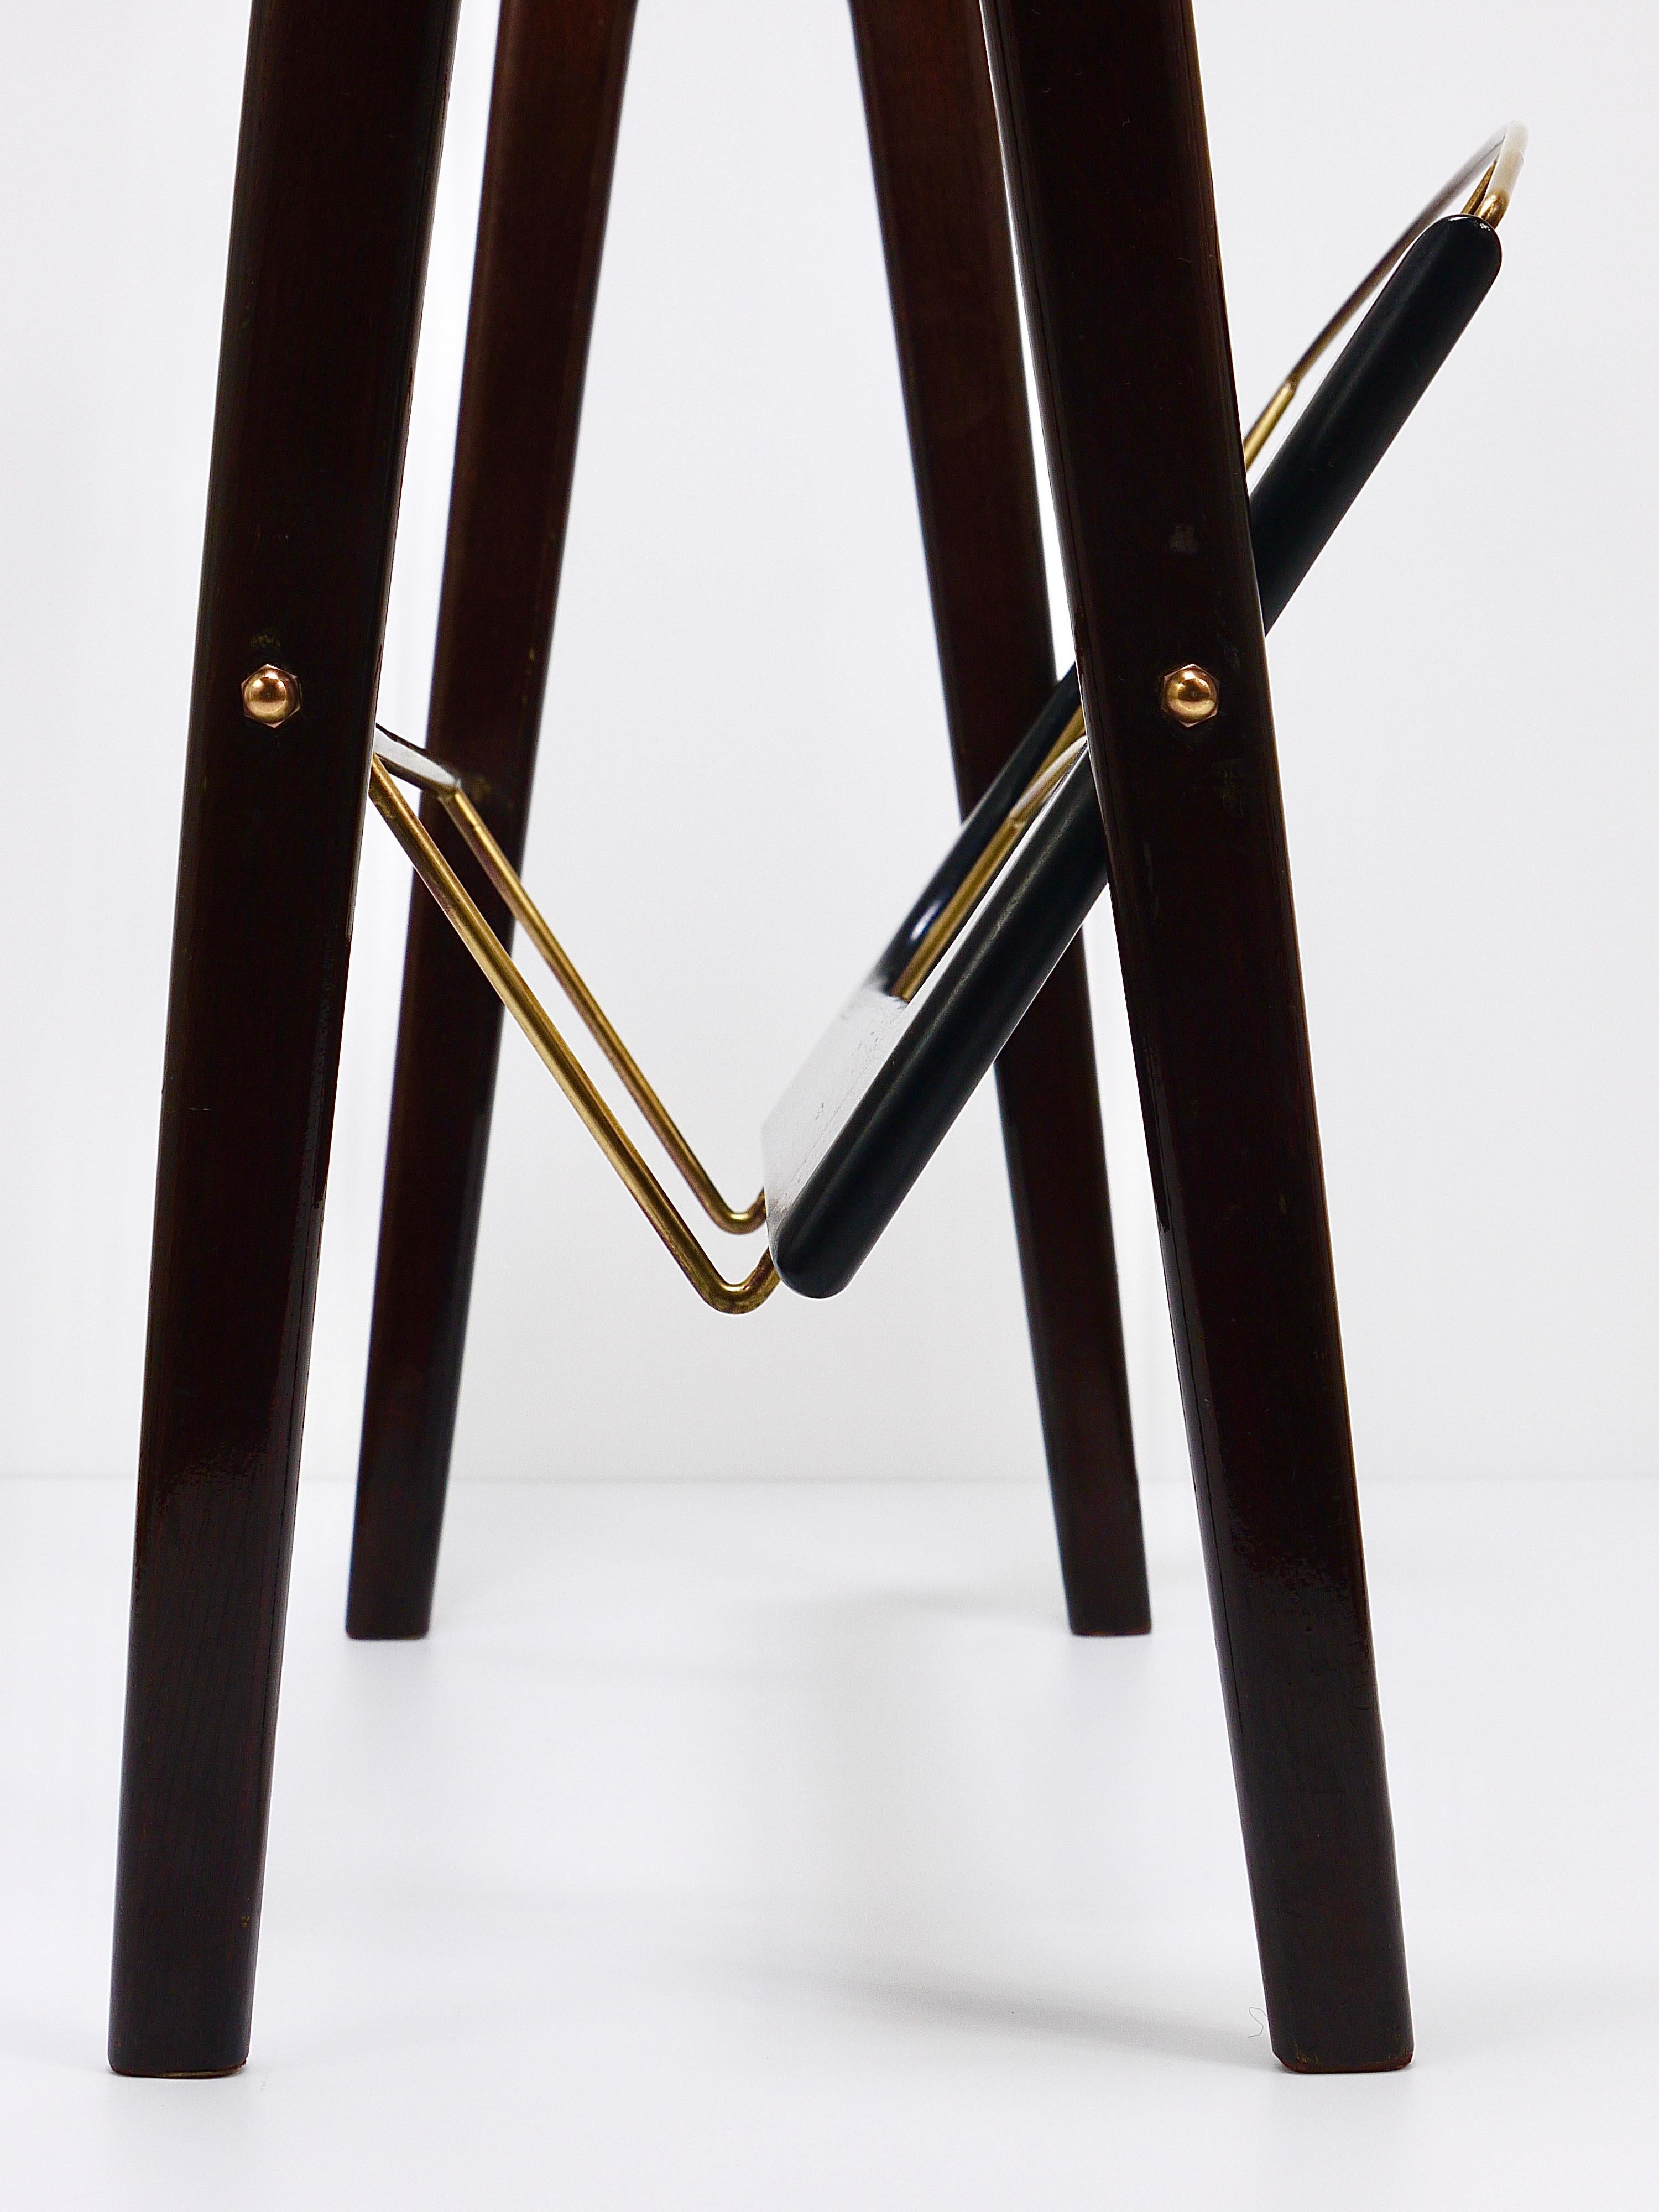 Cesare Lacca Midcentury Magazine Rack, Mahogany & Brass, Italy, 1950s For Sale 10